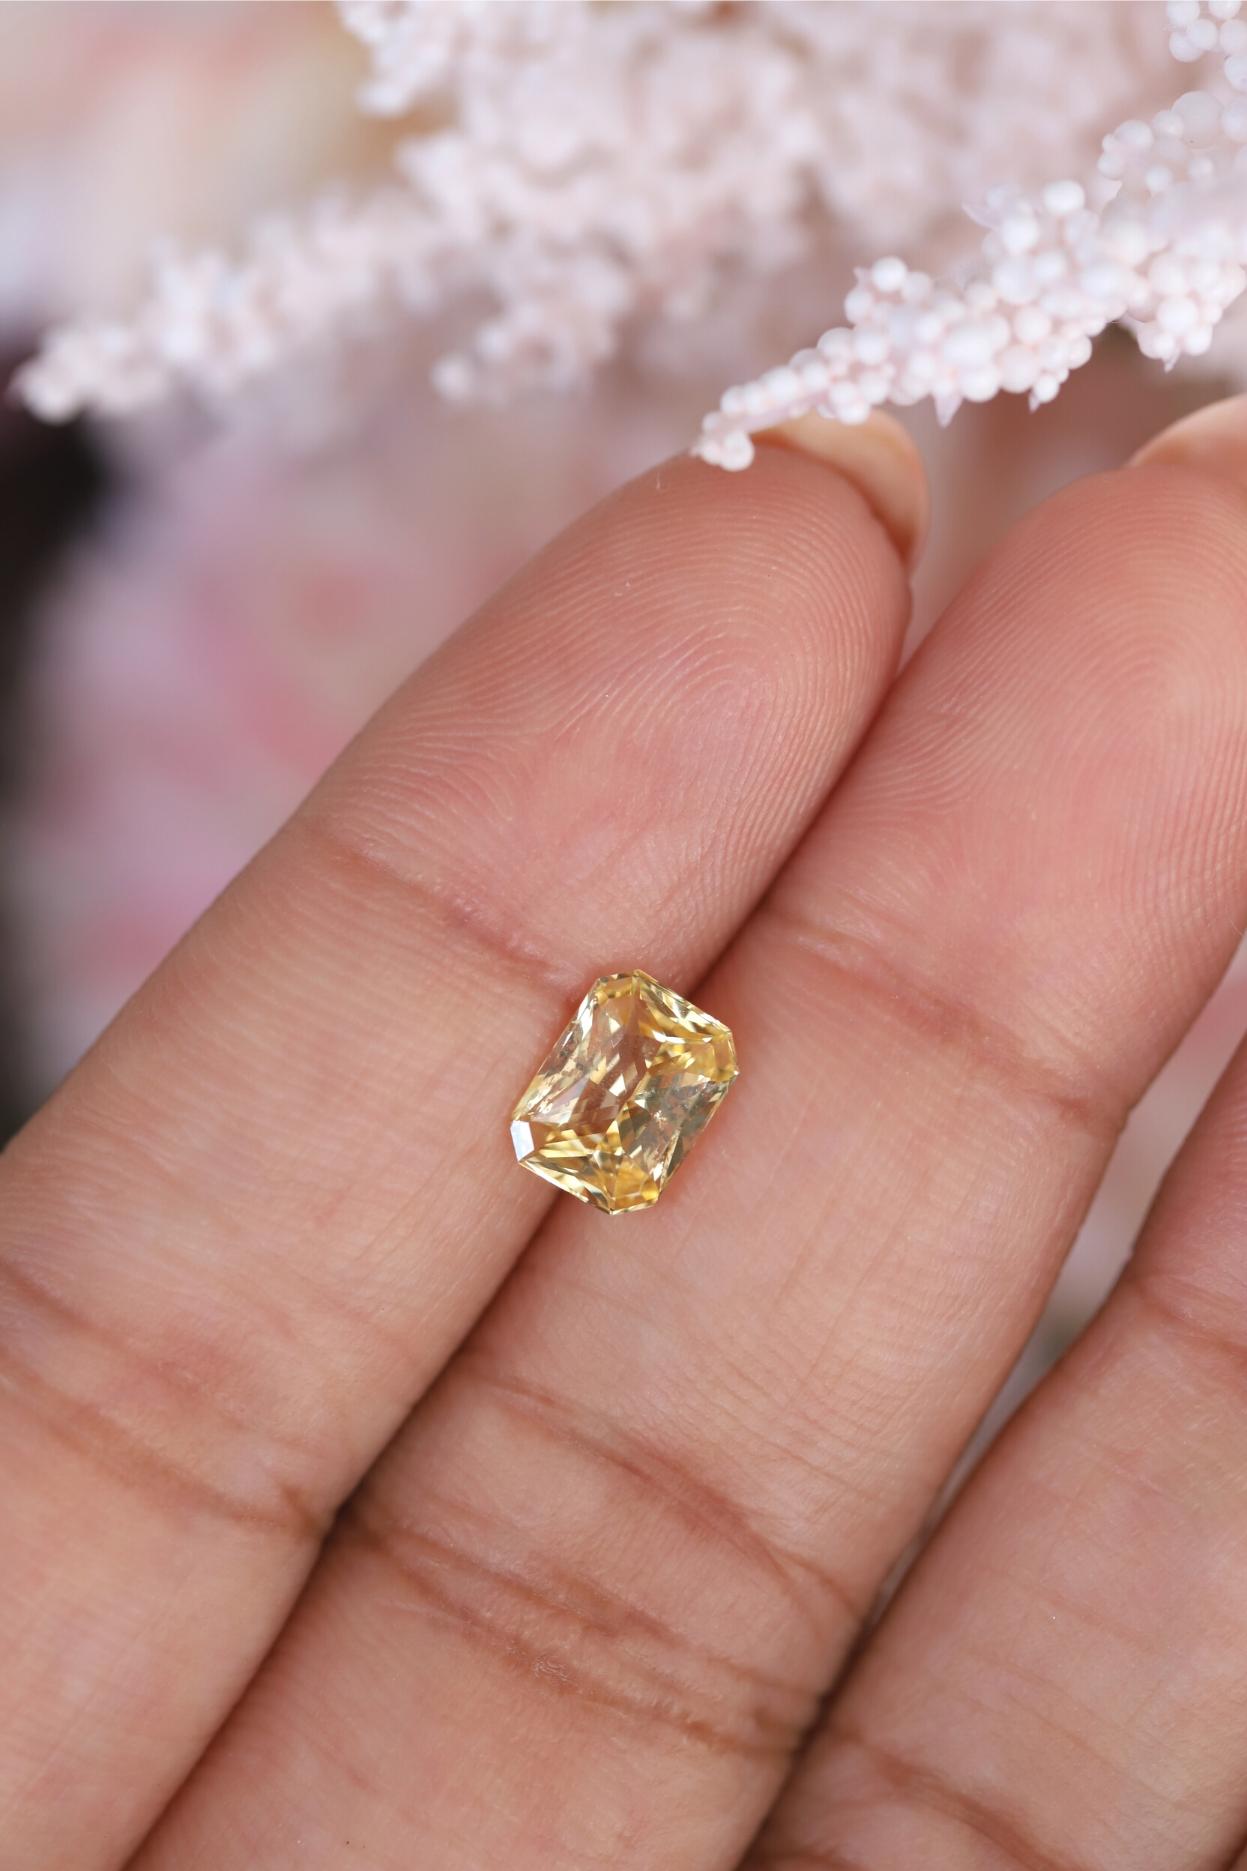 If Charm had a gemstone alter ego I bet it would be a yellow sapphire -  an exquisite,  smooth, buttery one like this one, radiating warmth and brilliance from each of its crisply cut facets. Perfectly radiant cut to flaunt her remarkable clarity